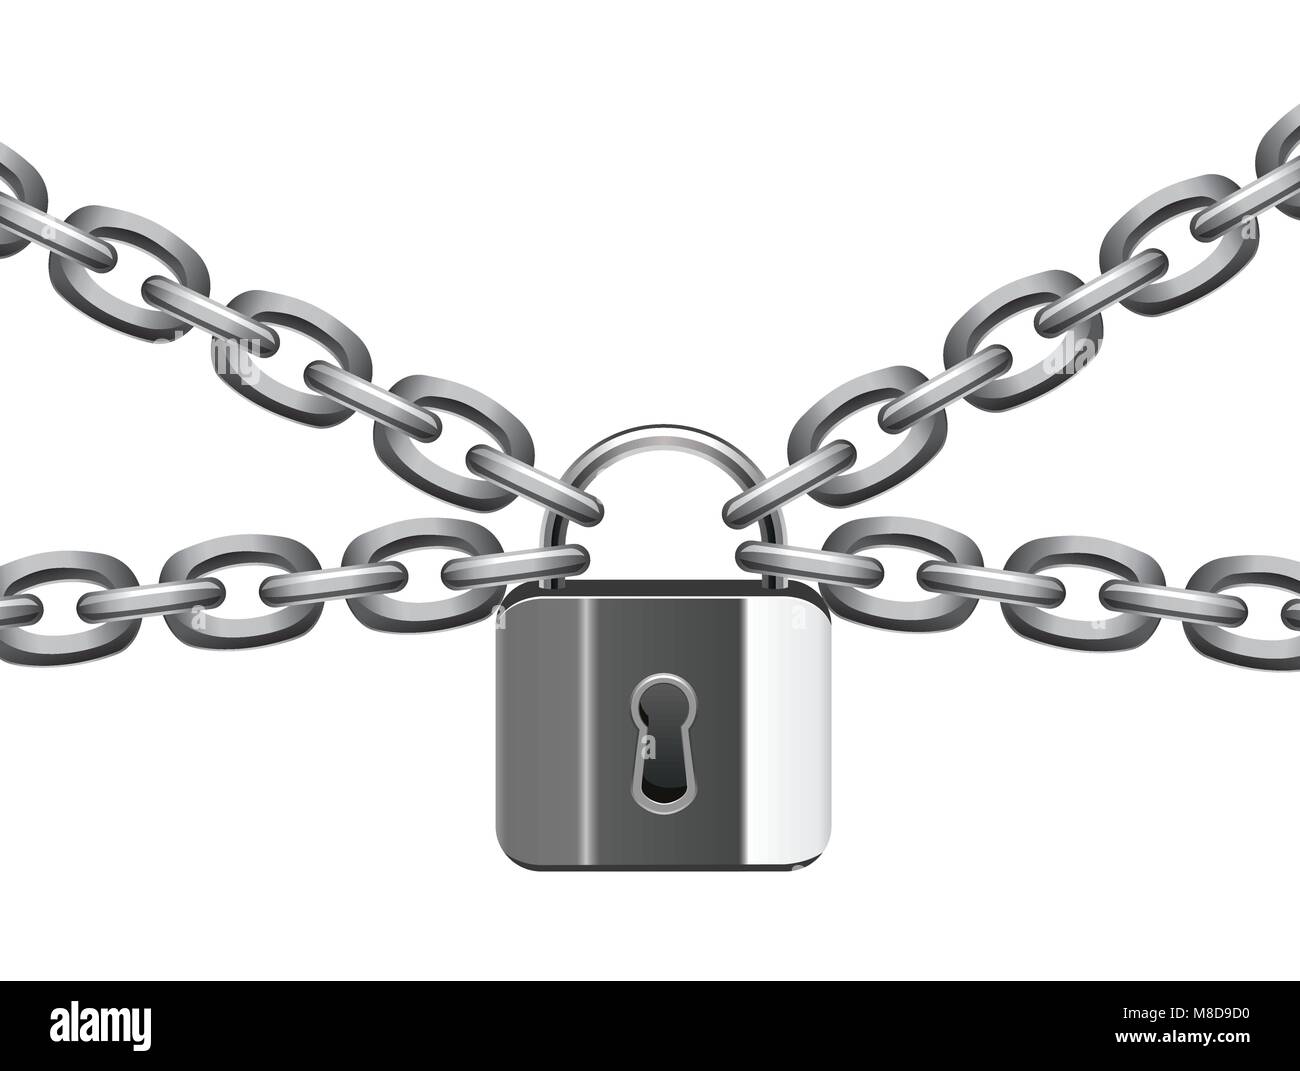 vector illustration of metal chain and padlock Stock Vector